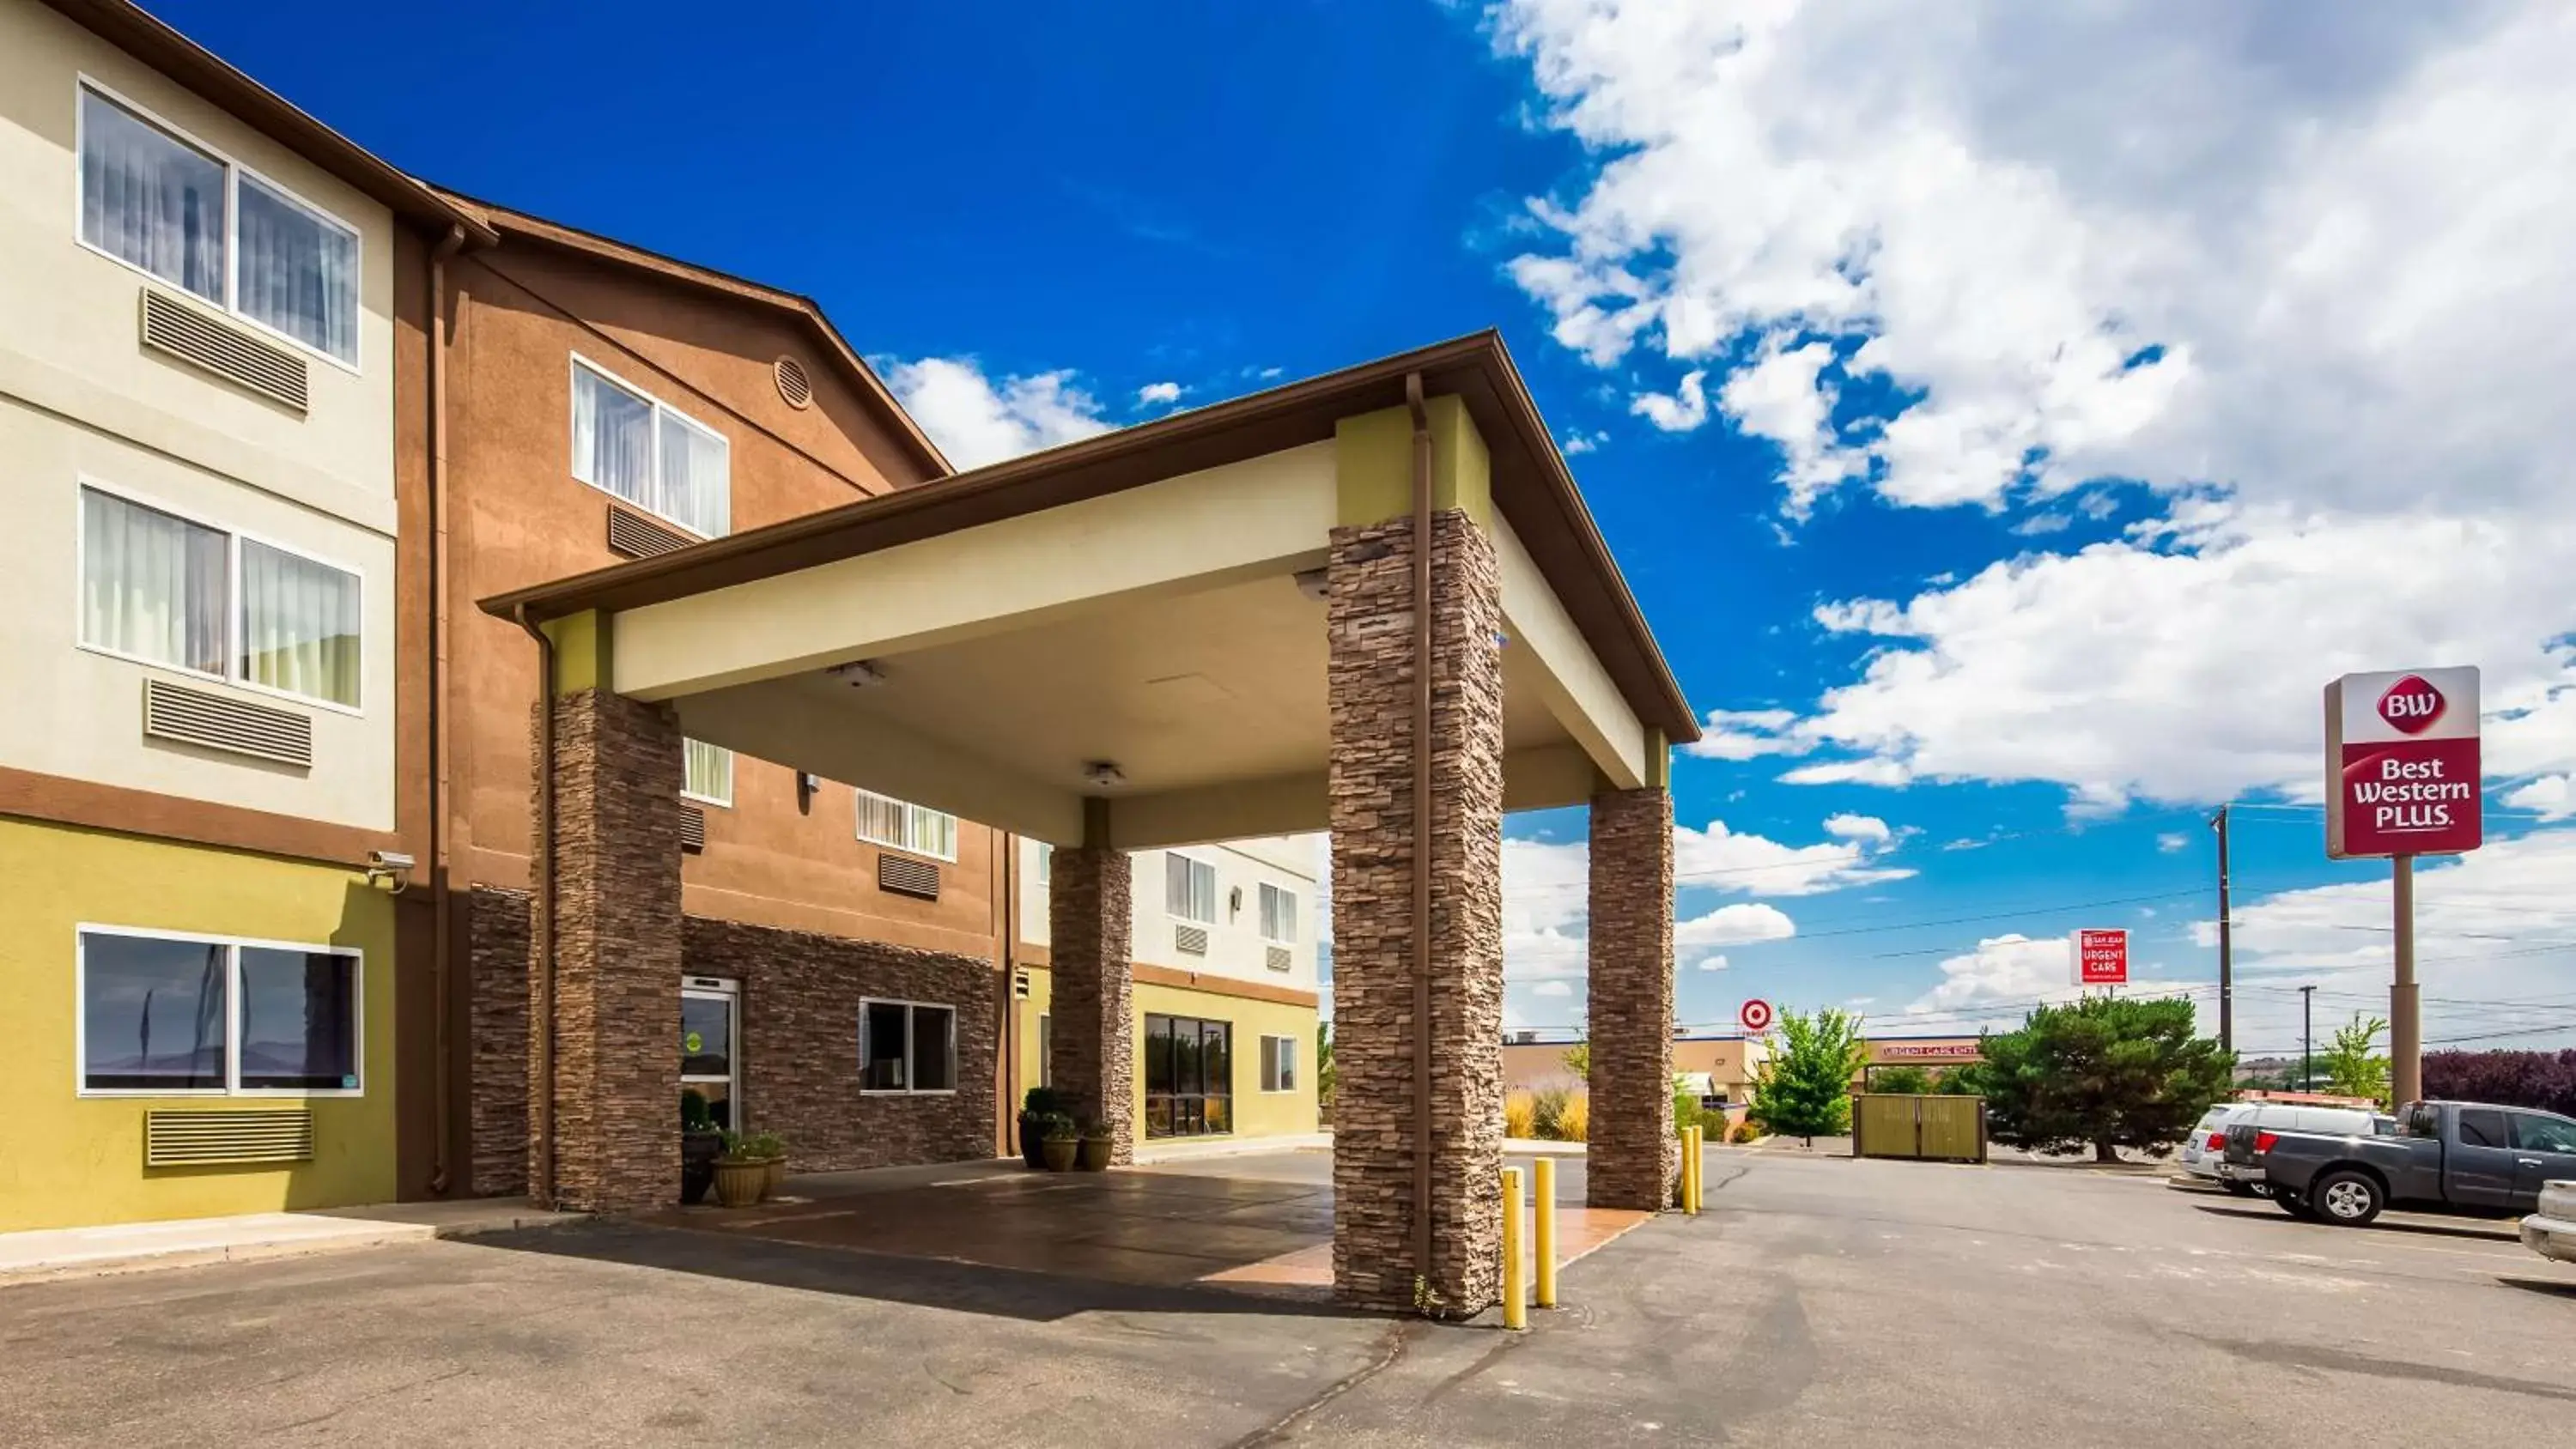 Property building in Best Western Plus the Four Corners Inn